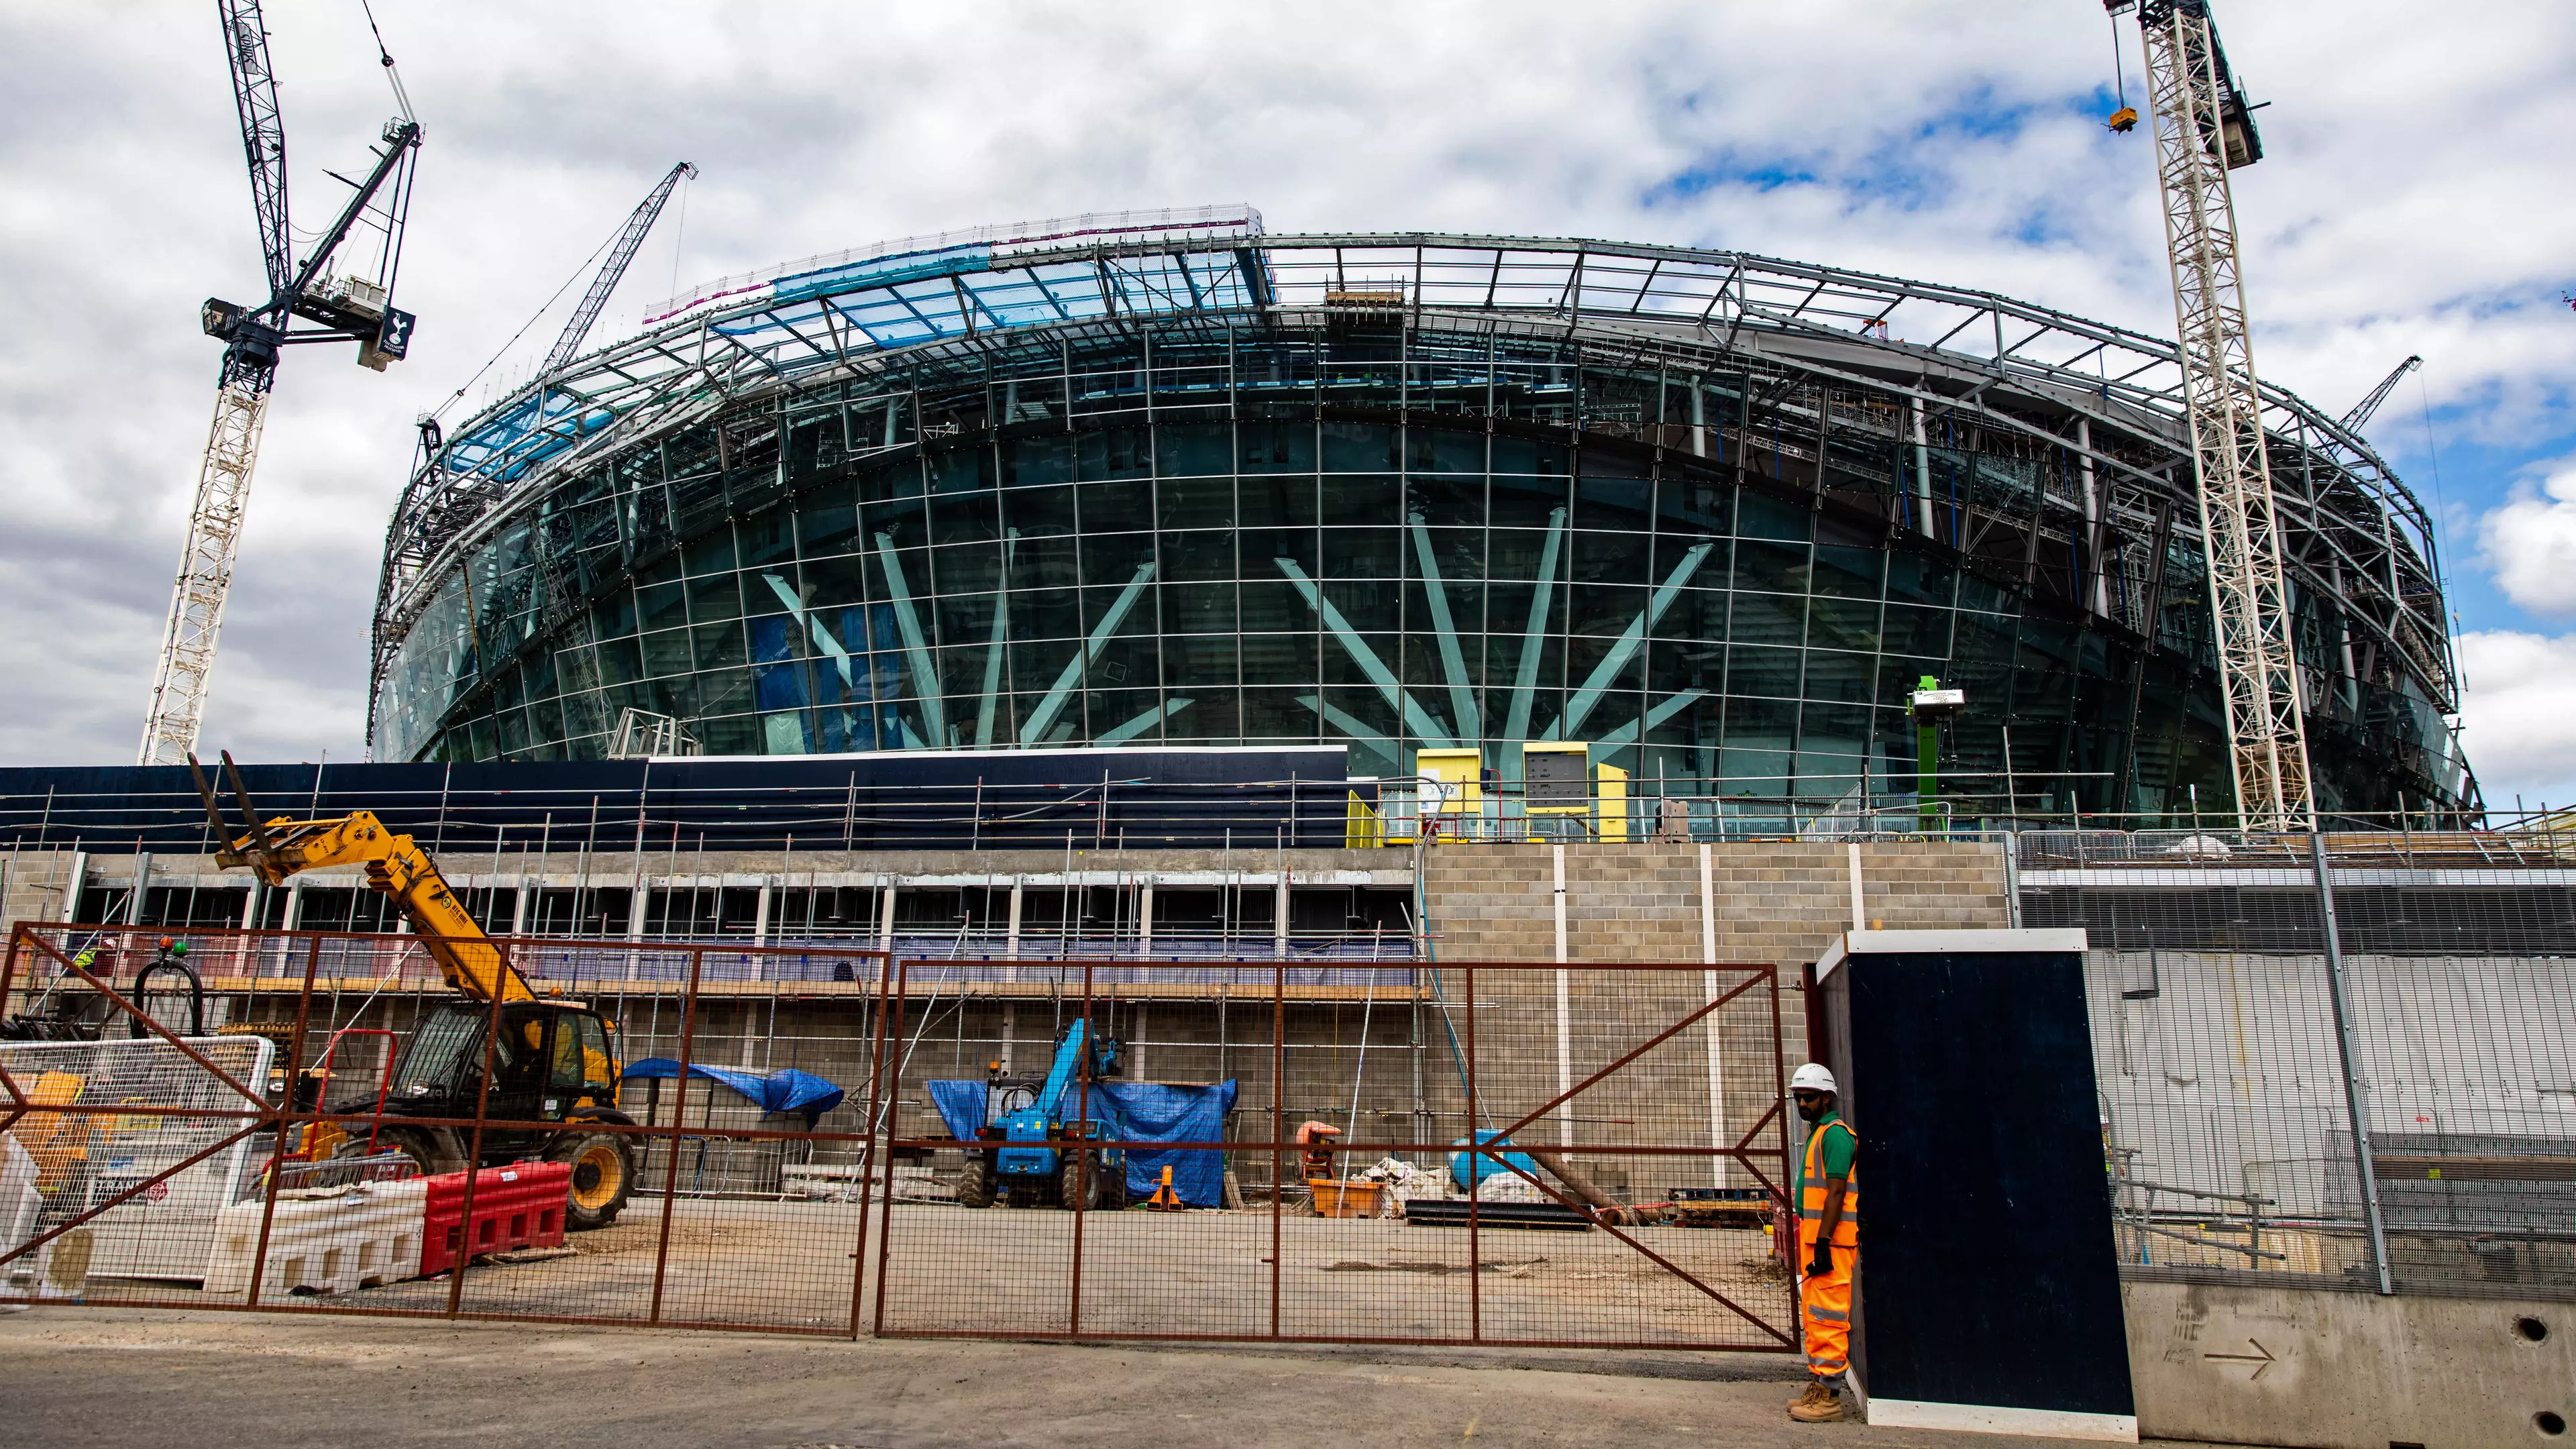 Report Alleges That Workers At Spurs Stadium Were On Alcohol And Cocaine